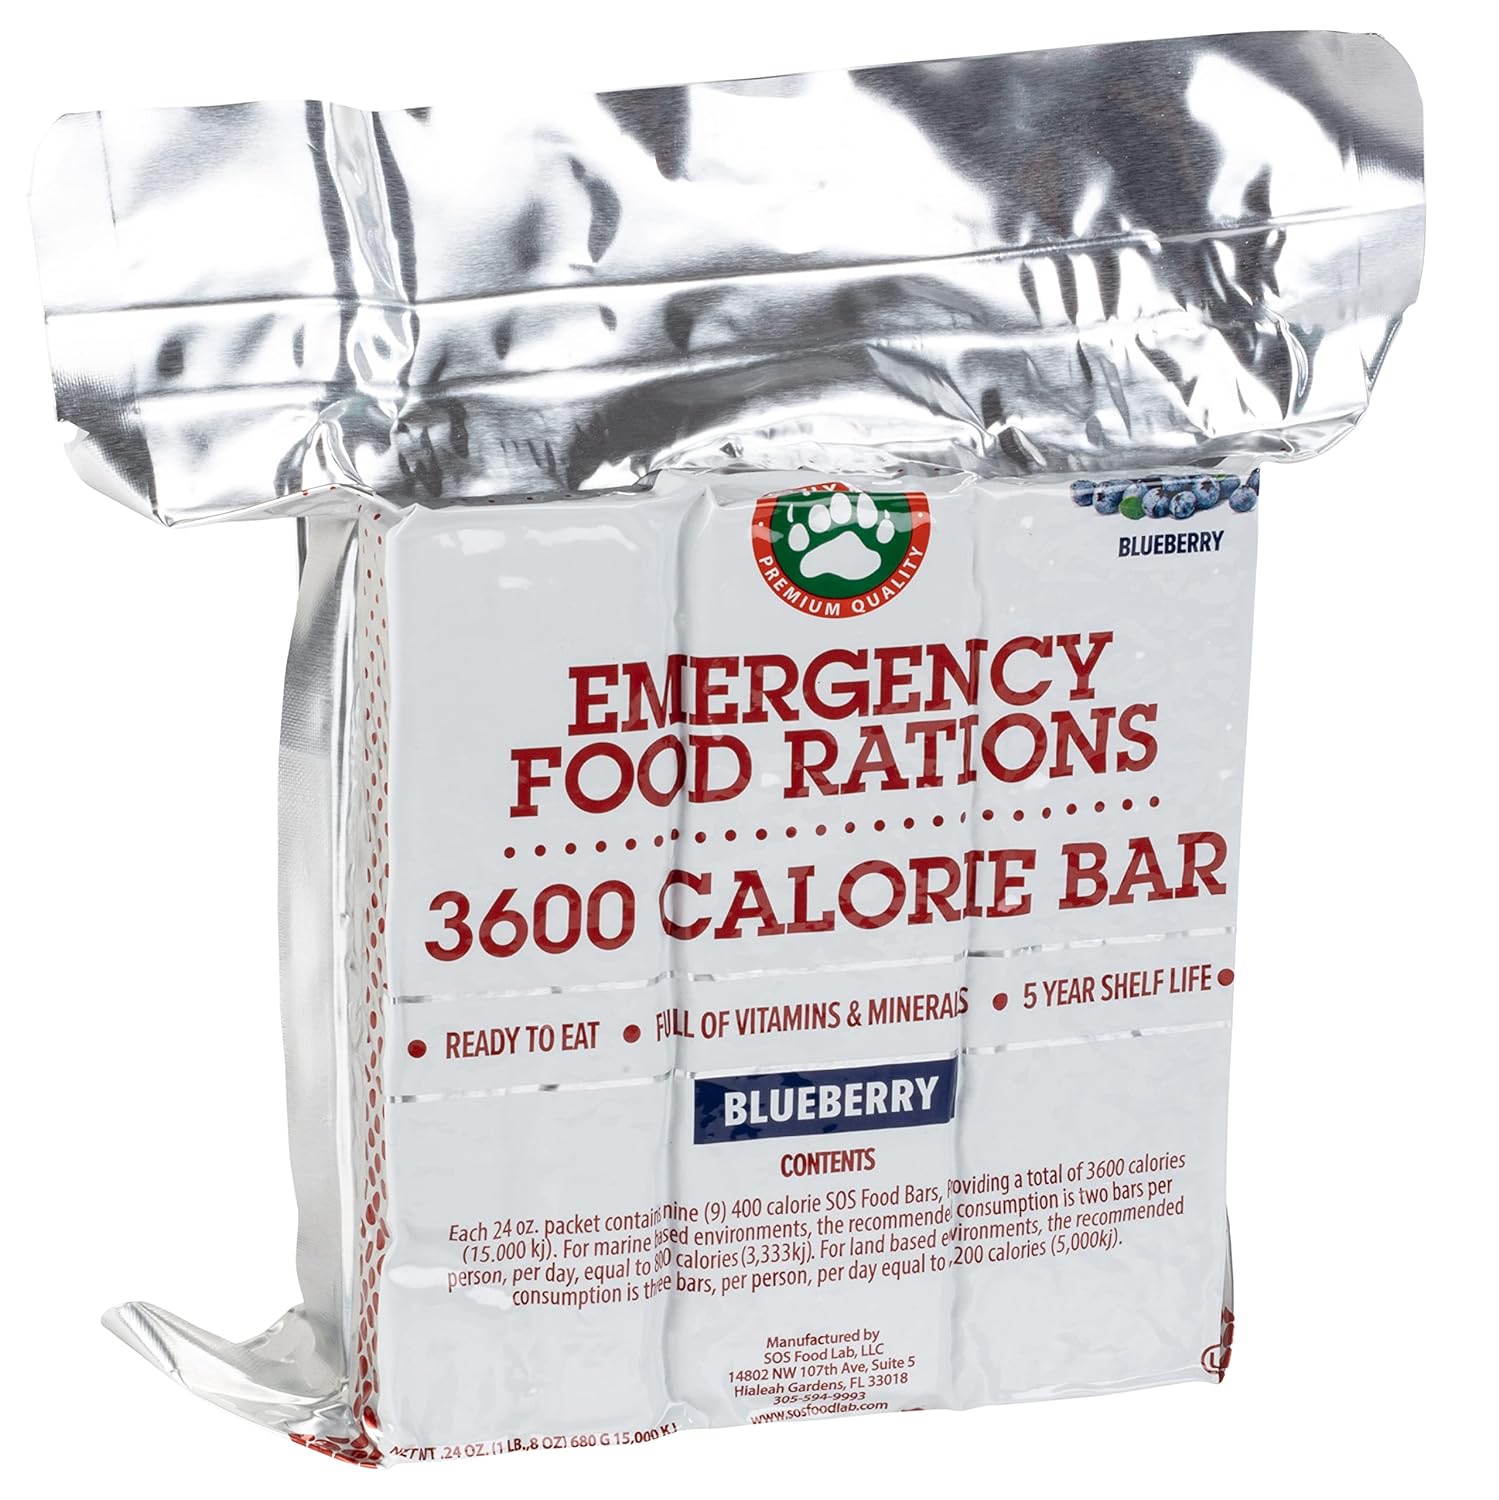 Generic Grizzly Gear Emergency Food Rations- 3600 Calorie Bars (Blueberry) - 3 Day, 72 Hour Ready to Eat Supply for Disaster, Hurricane